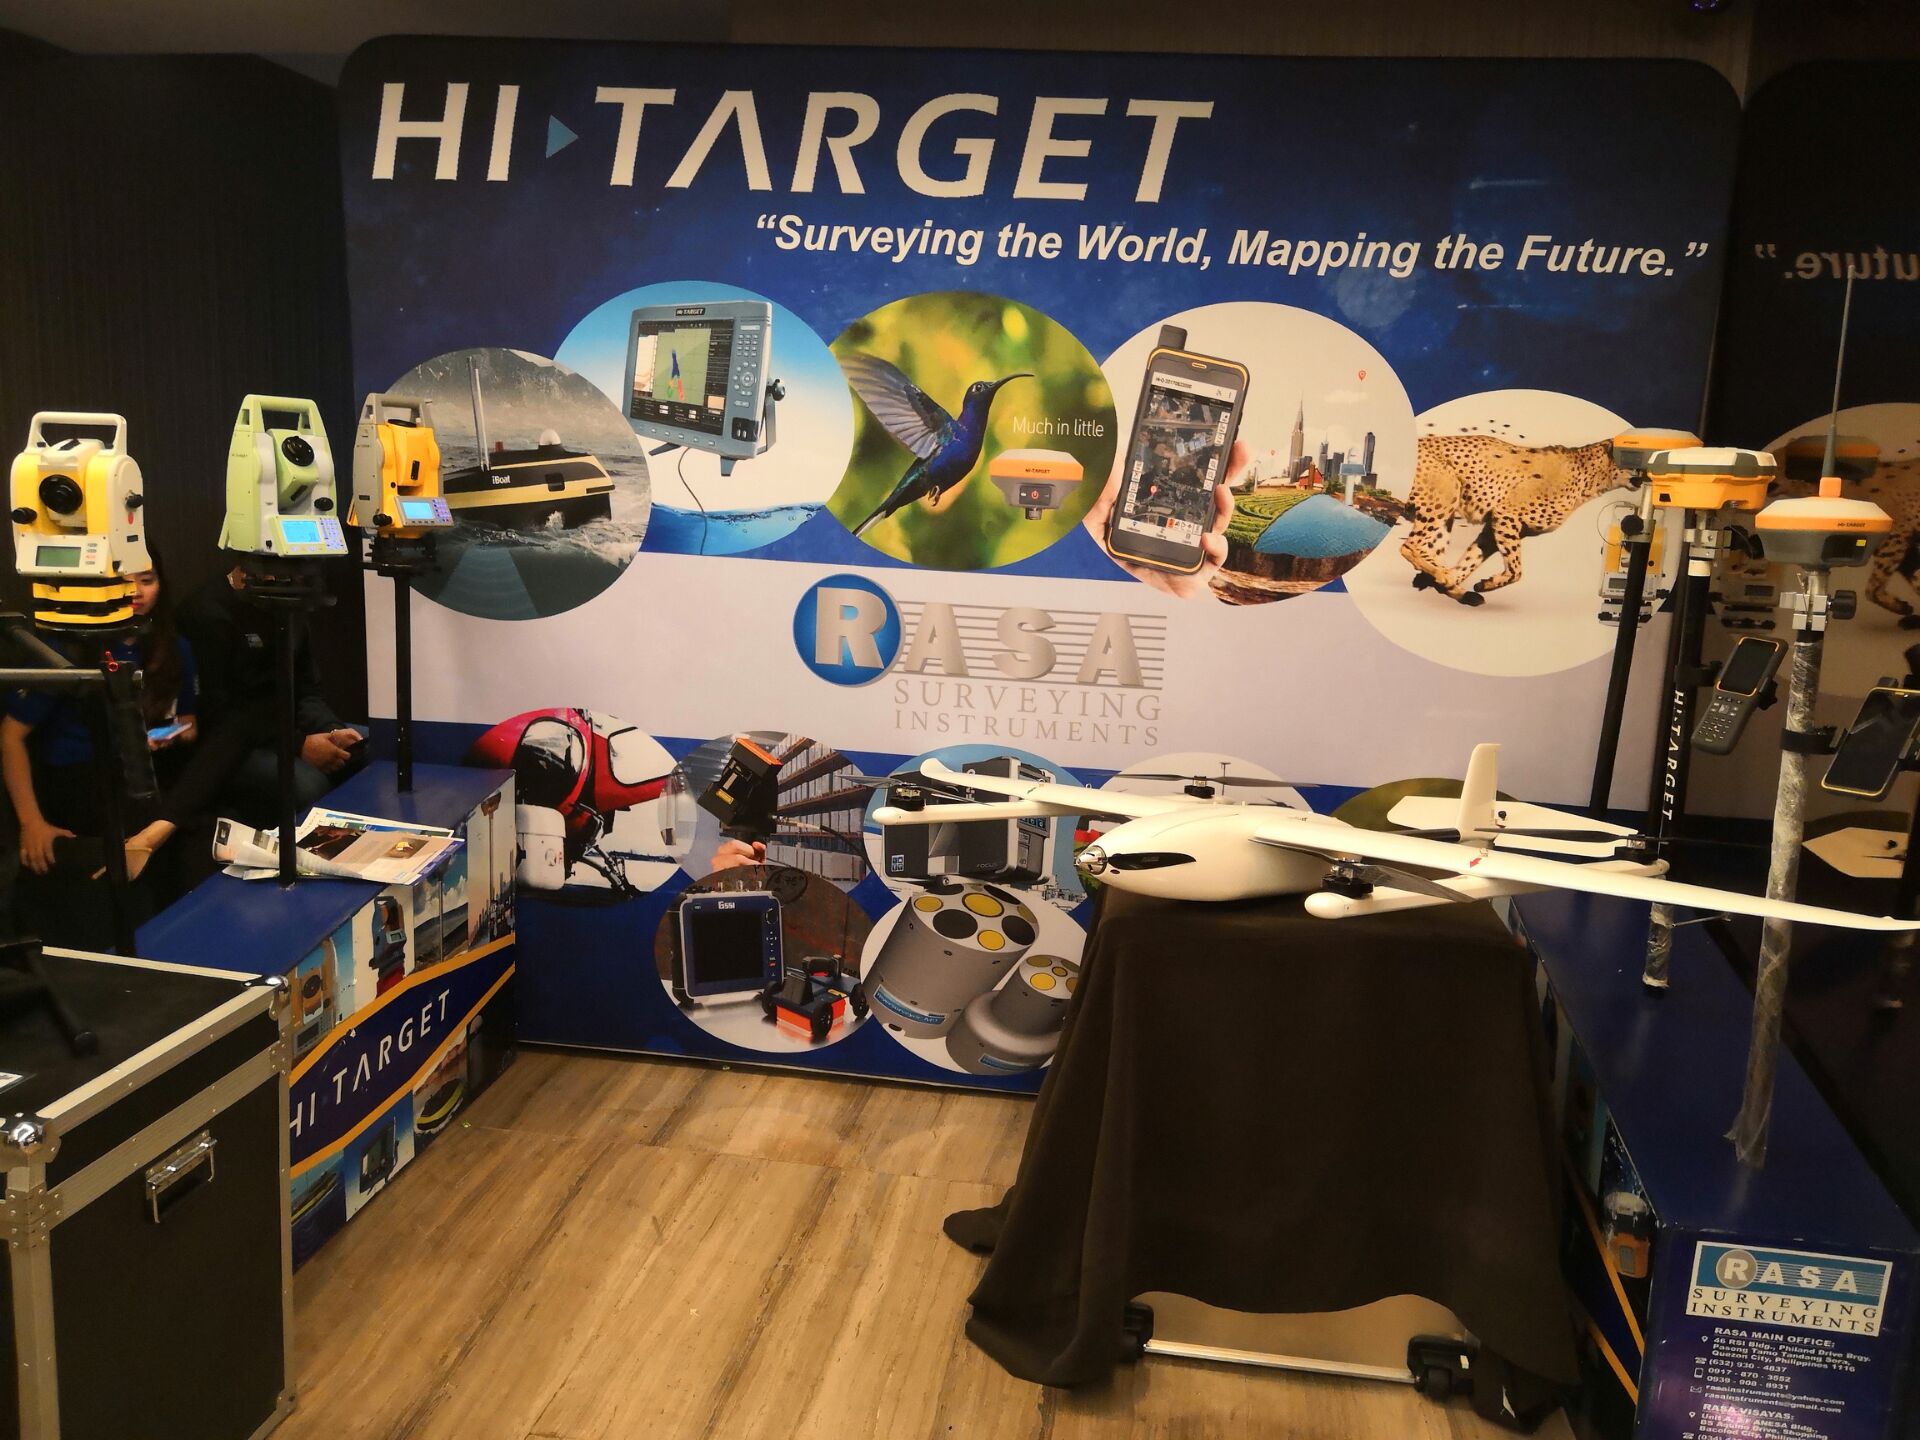 20190318054053966 - Hi-Target Participated in RASA Technology Forum 2019